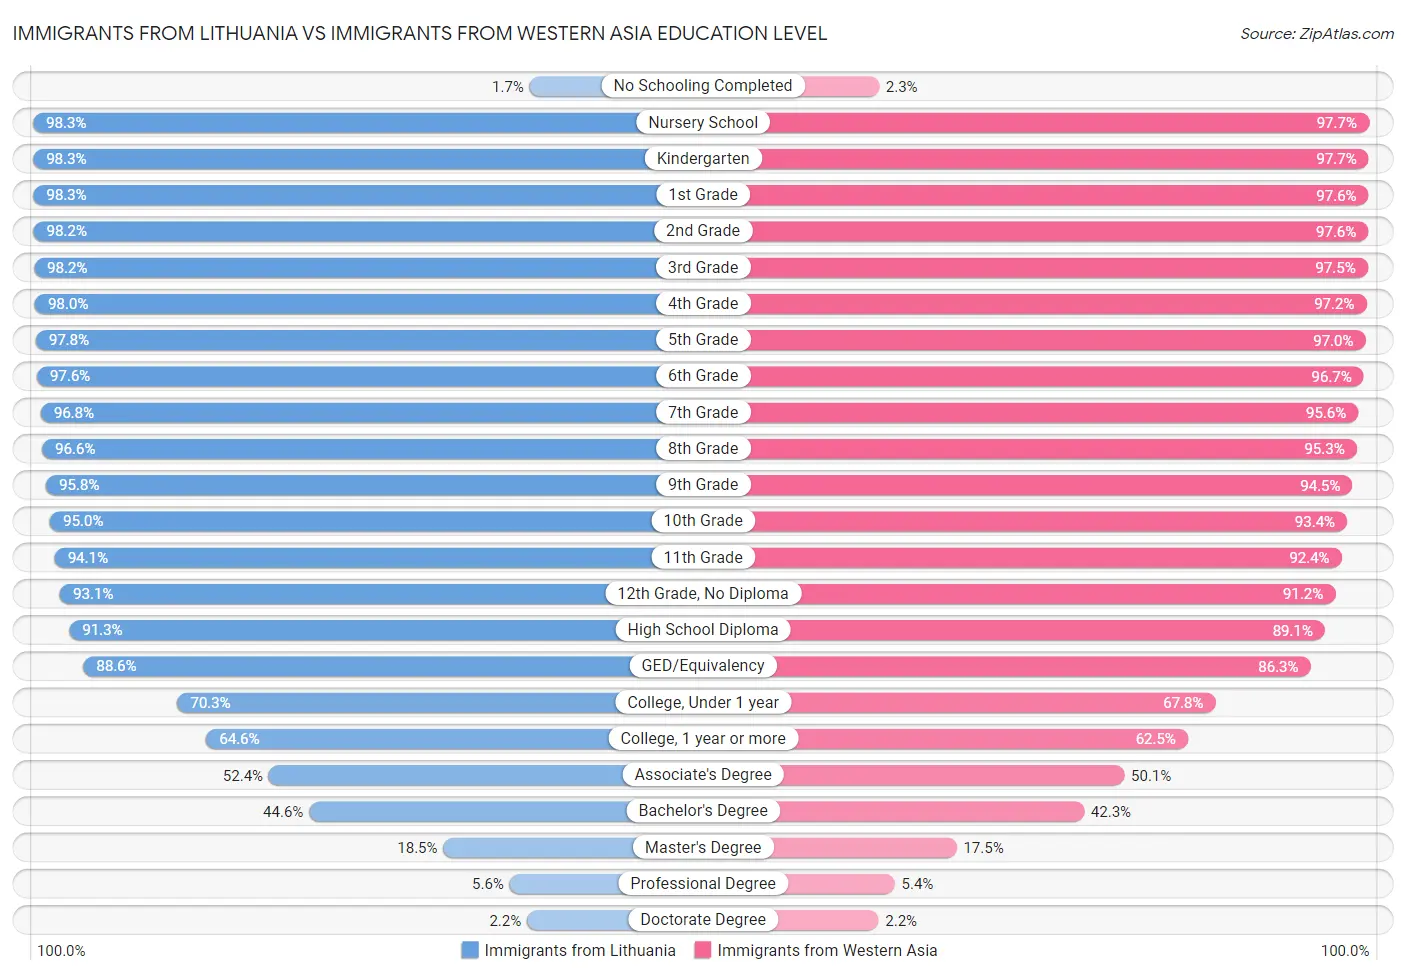 Immigrants from Lithuania vs Immigrants from Western Asia Education Level